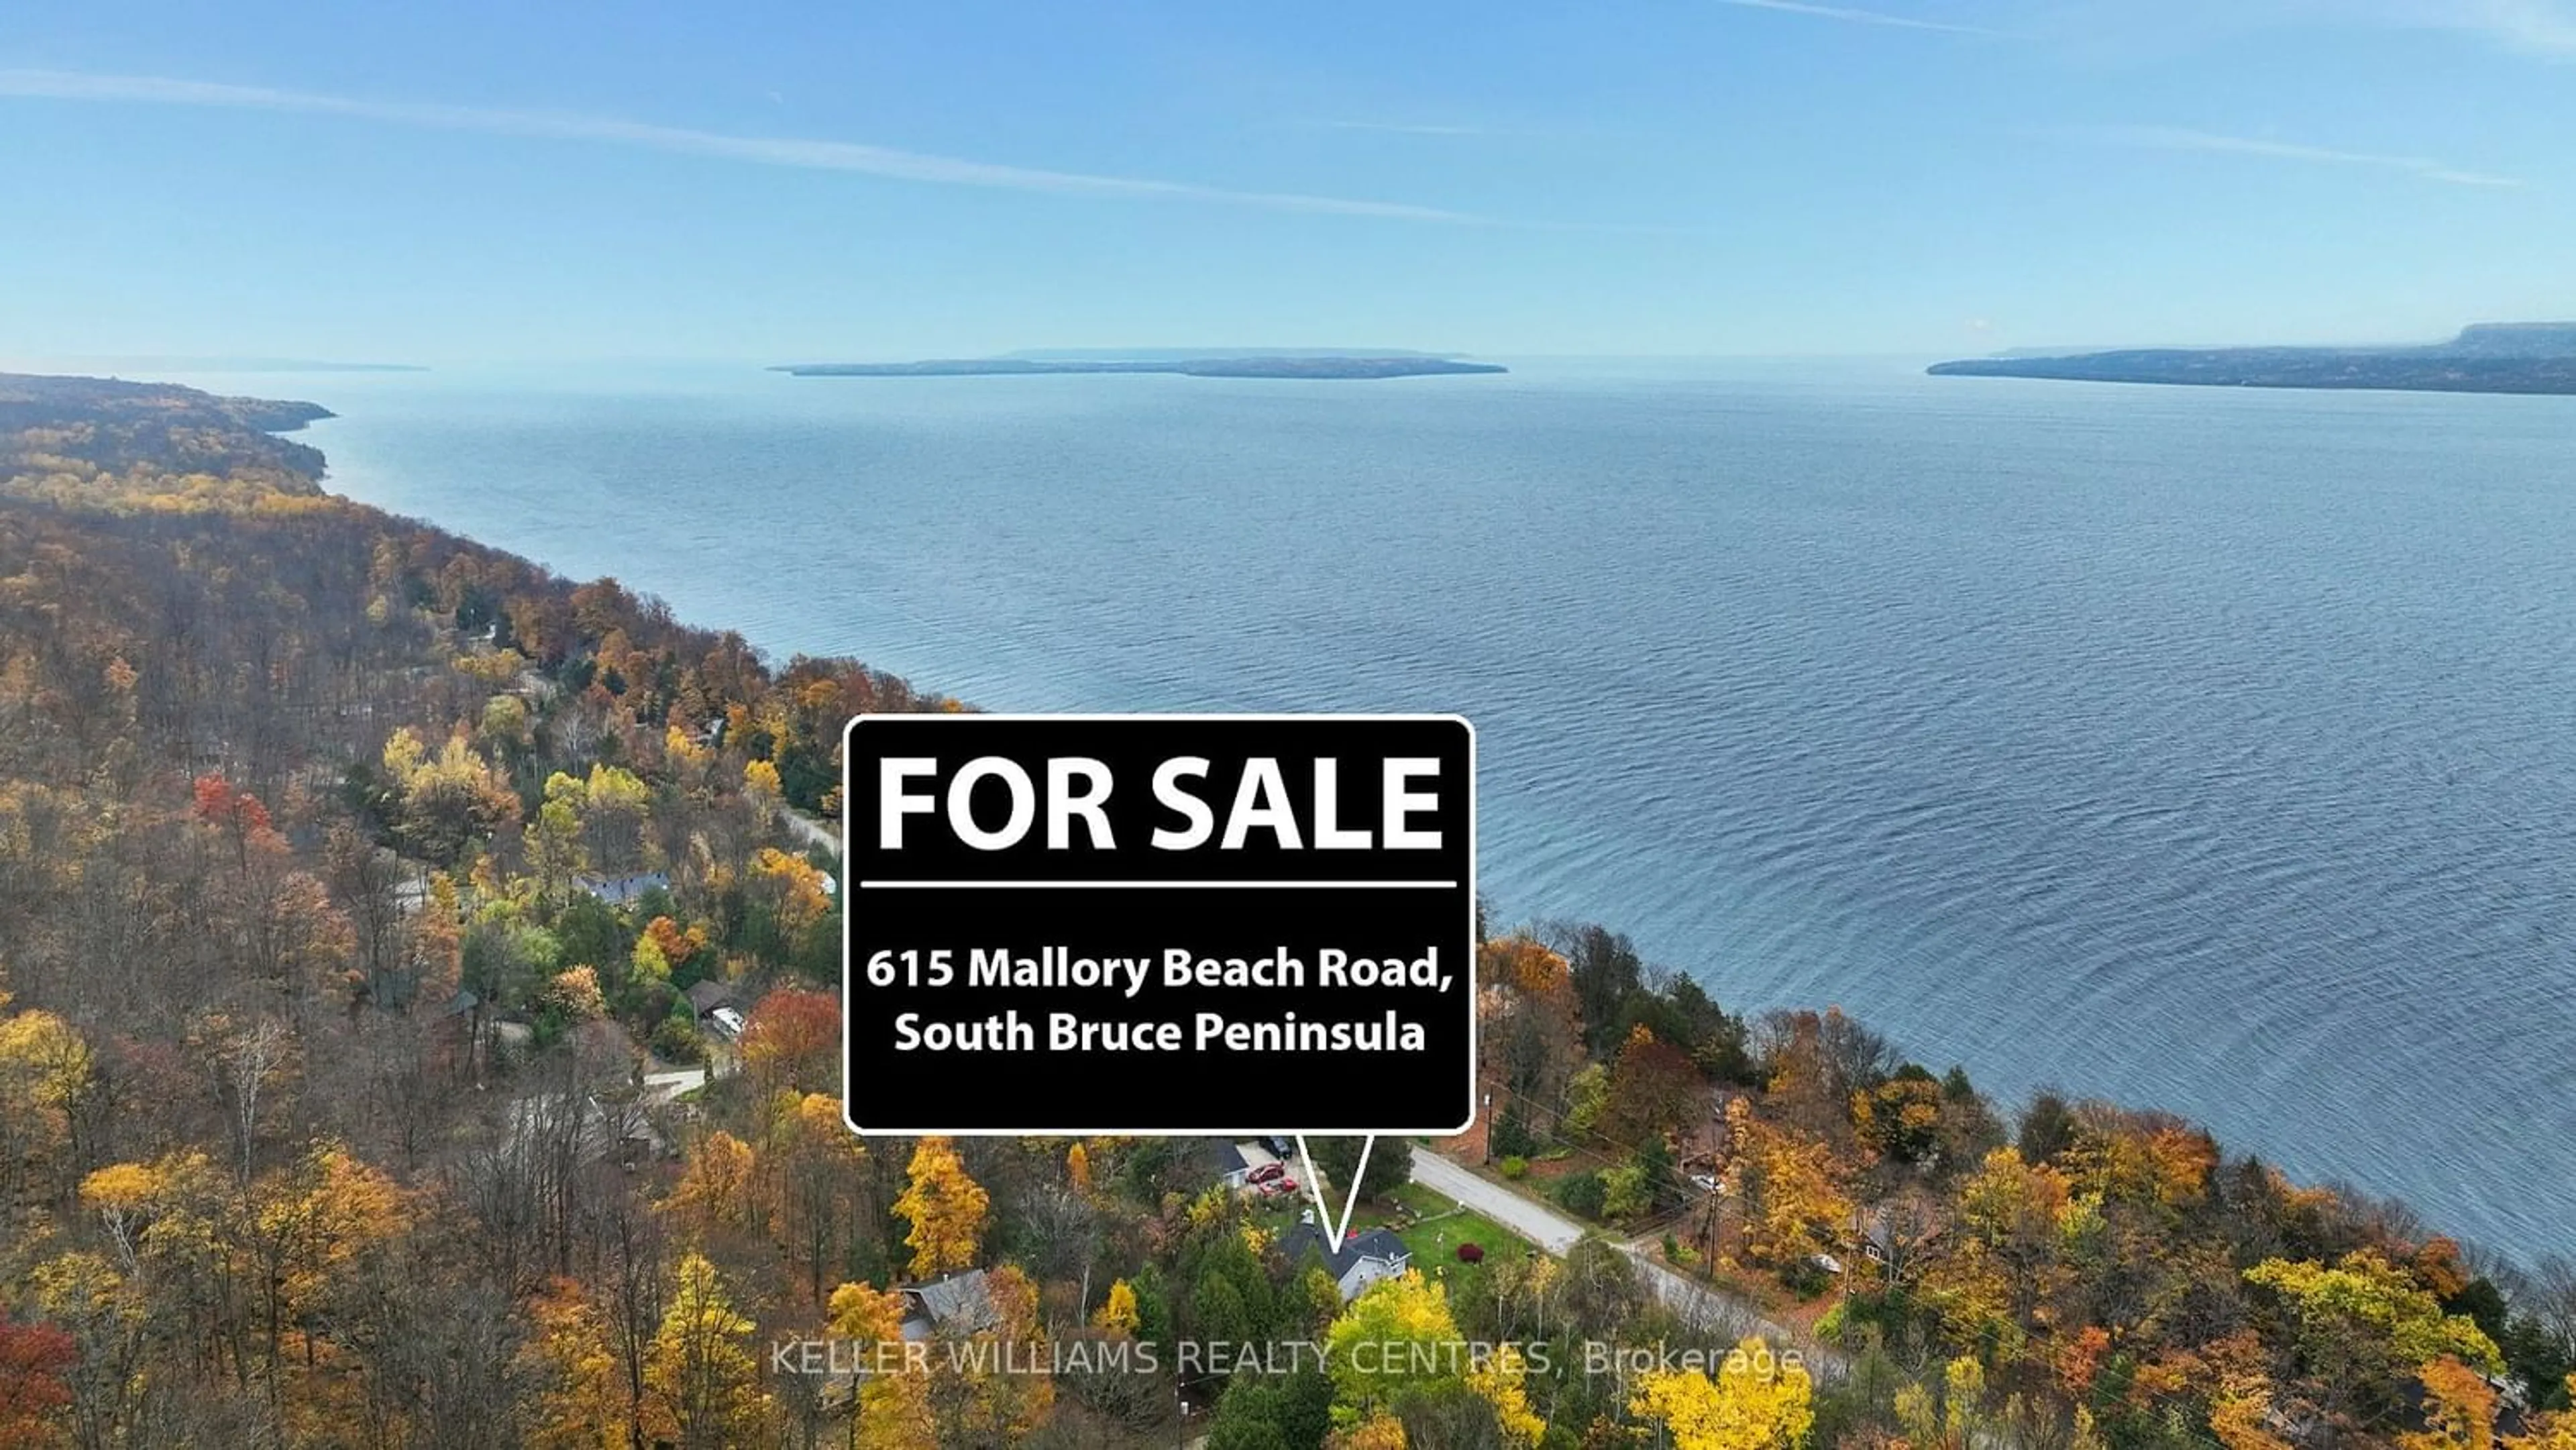 Lakeview for 615 Mallory Beach Rd, South Bruce Peninsula Ontario N0H 2T0